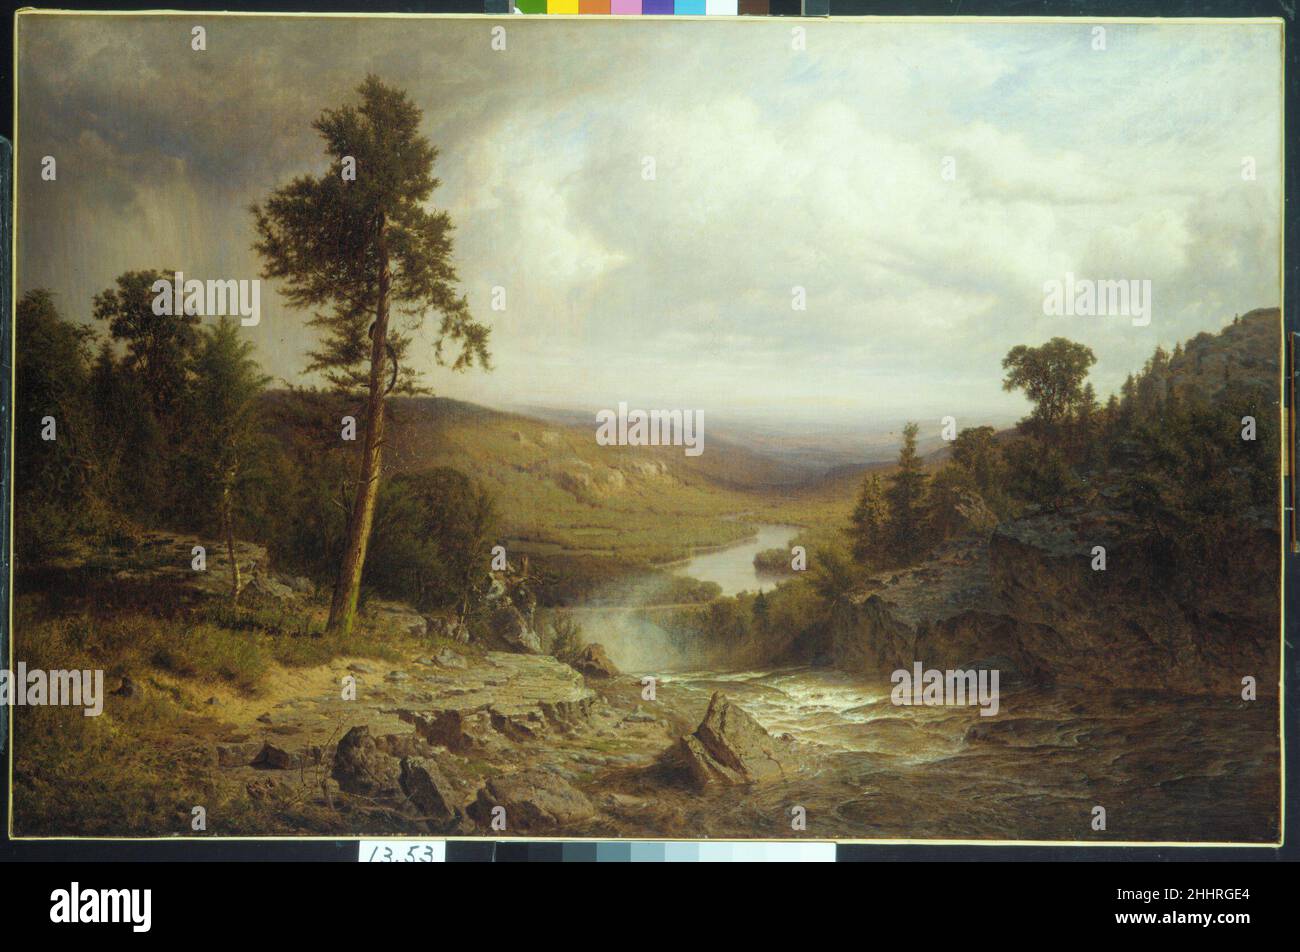 Tennessee 1866 Alexander H. Wyant Wyant, a native of Ohio, painted Tennessee after his 1865 trip to Europe, where he had studied with the Norwegian artist Hans Fredrik Gude. The composition shows his transition from the precise, linear technique of the Hudson River School at midcentury to the freer style, inspired by the Barbizon landscape painters, that characterized his later work. The subject is unusual in that it was painted during the Civil War, at a time when Northern landscape artists avoided portraying the Southern states. While there is no record of the artist’s visiting Tennessee, he Stock Photo